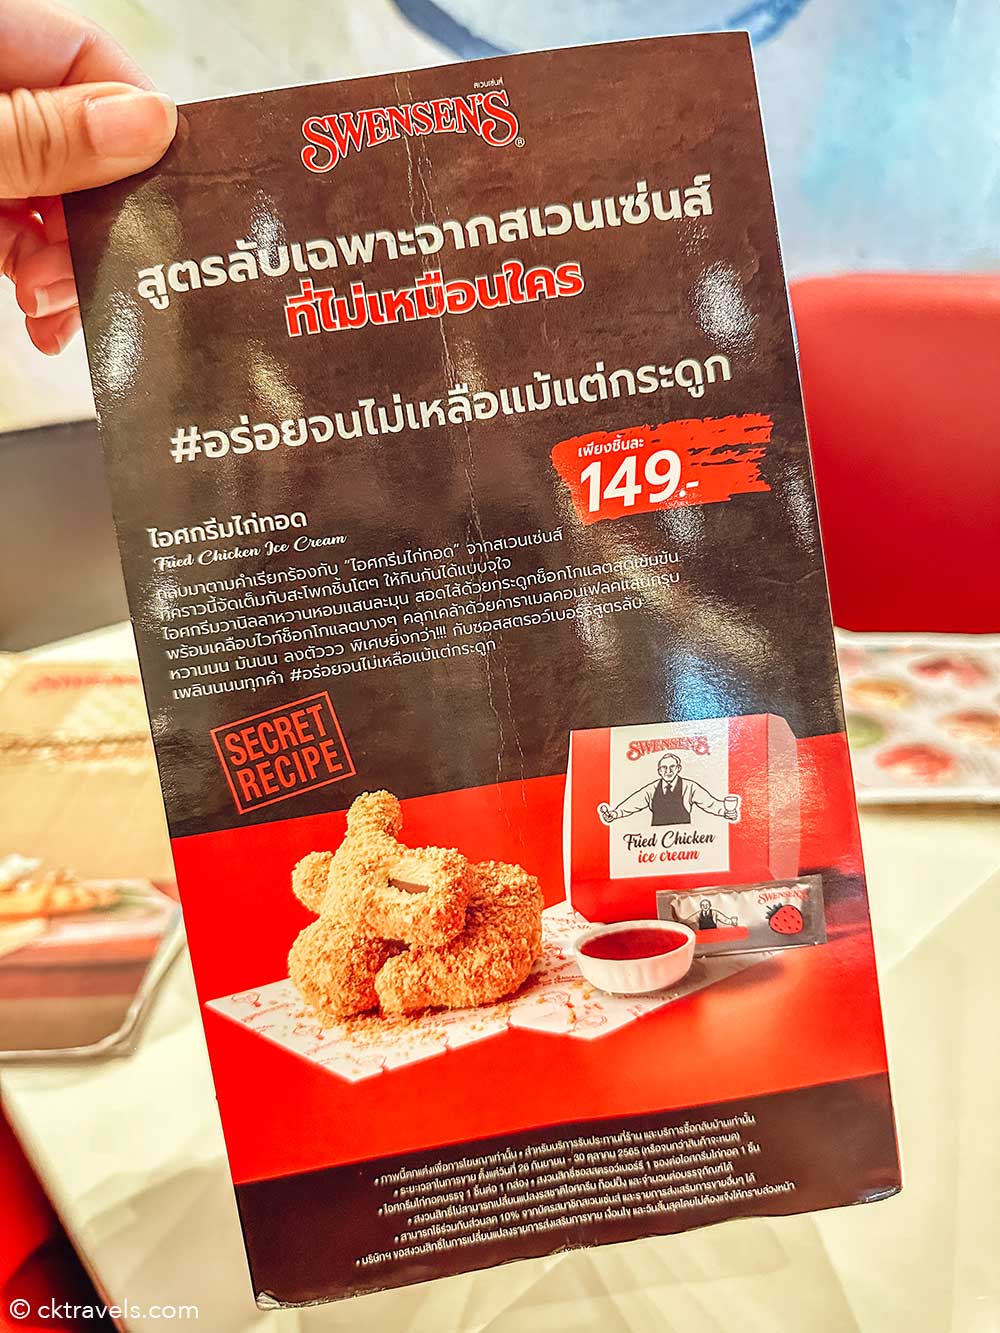 Fried Chicken Ice Cream and Meat Zero in Spotlight at ThaiFex